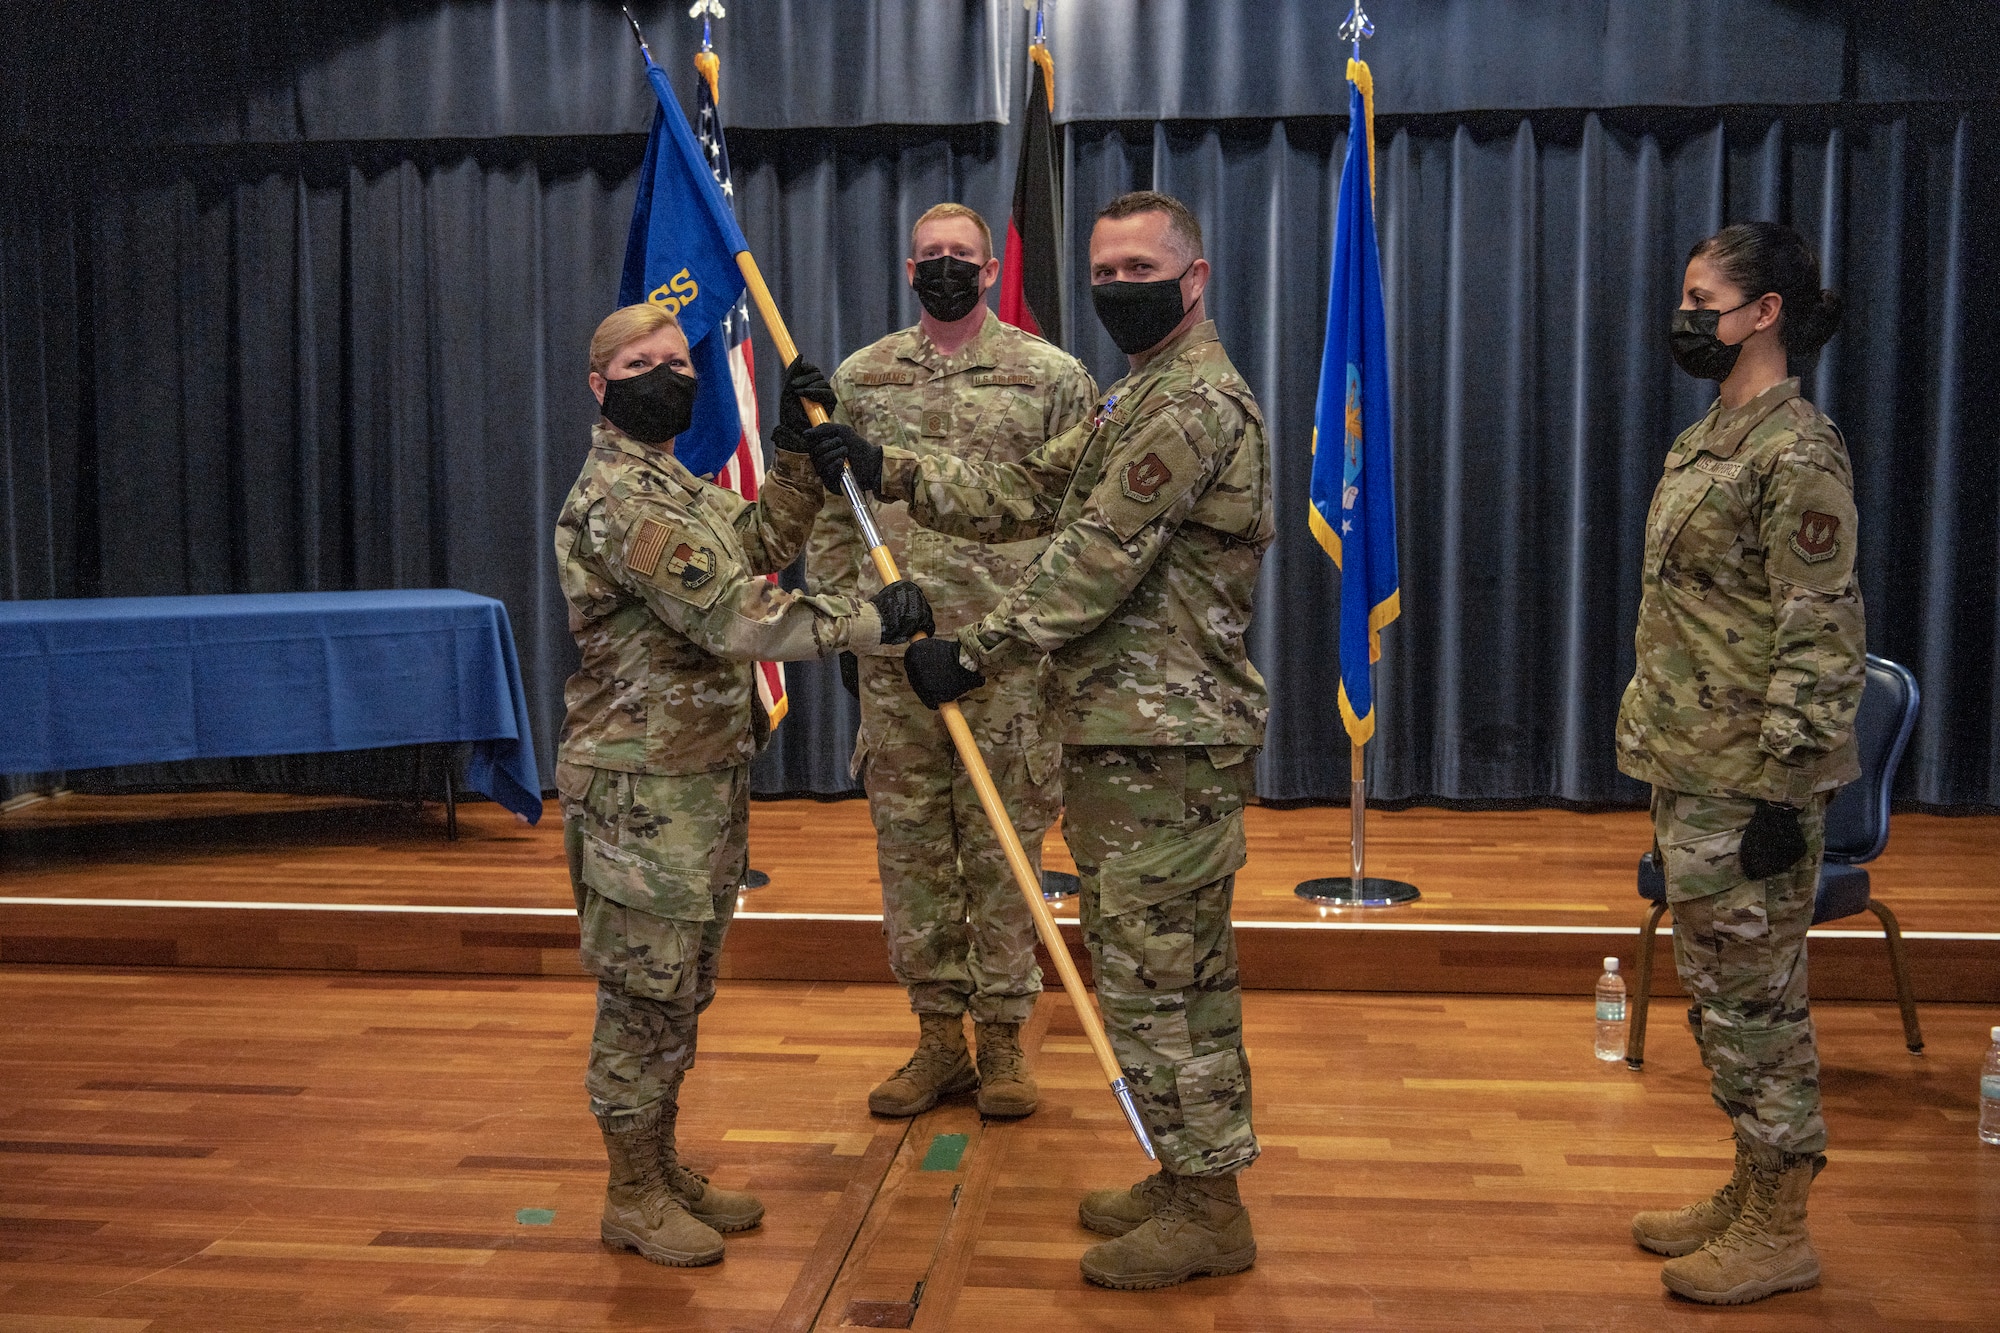 U.S. Air Force Lt. Col. Adam Baker (right), outgoing 52nd Force Support Squadron commander, passes the guidon to U.S. Air Force Col. Betsy Ross, 52nd Mission Support Group commander, at the 52nd FSS change of command ceremony July 6, 2021, on Spangdahlem Air Base, Germany. Baker was commended for facilitating high spirits and fostering morale within the FSS despite the challenges presented by the COVID-19 pandemic. (U.S. Air Force photo by Senior Airman Ali Stewart)